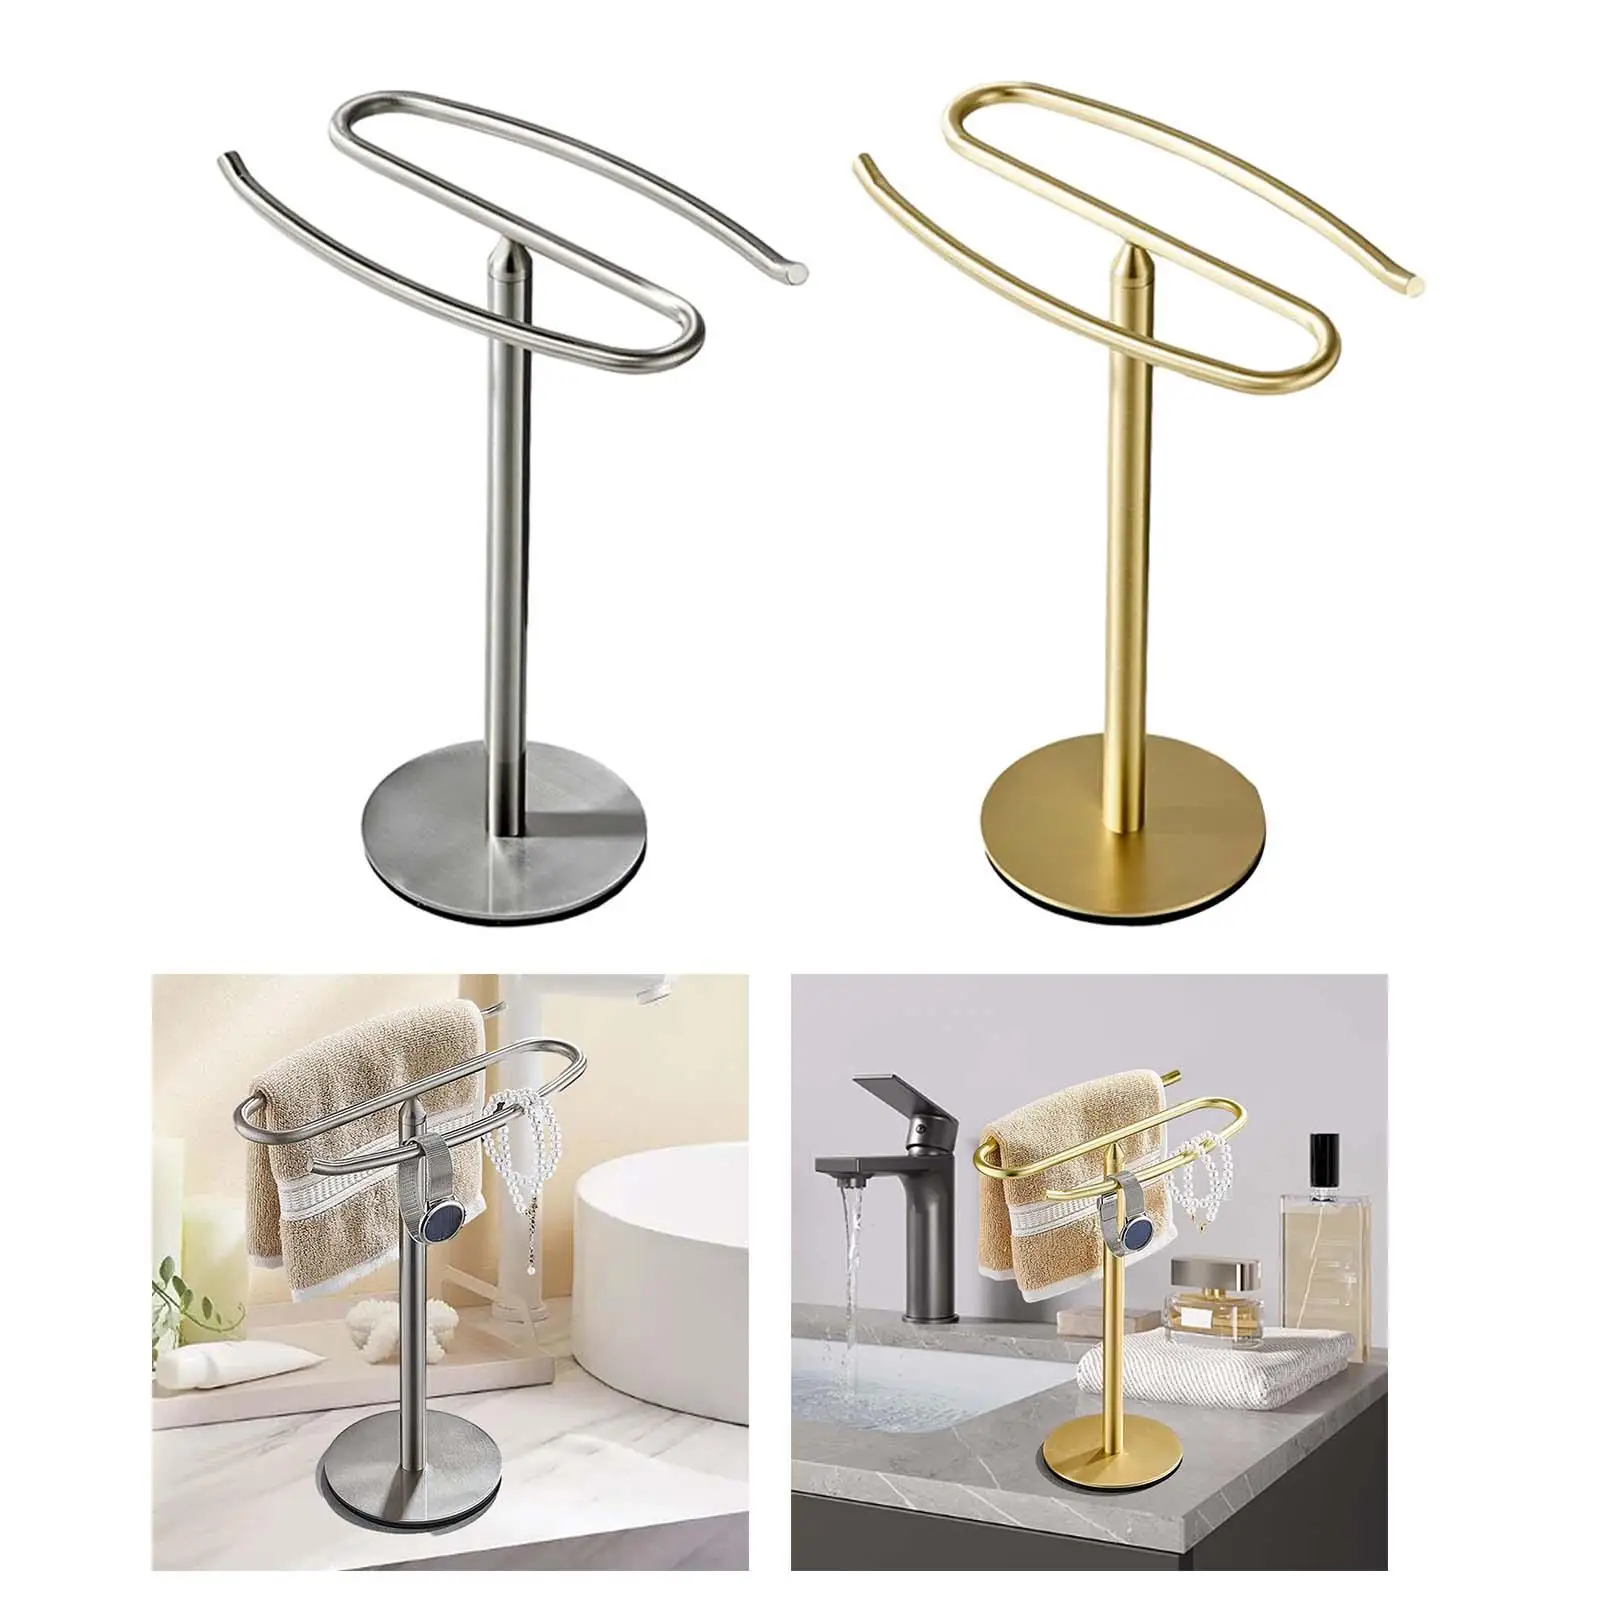 Hand Towel Stand Watch Holder Antiskid Bottom Versatile 12inch Tall Free Standing for Jewelry Bracelets Display Accessories